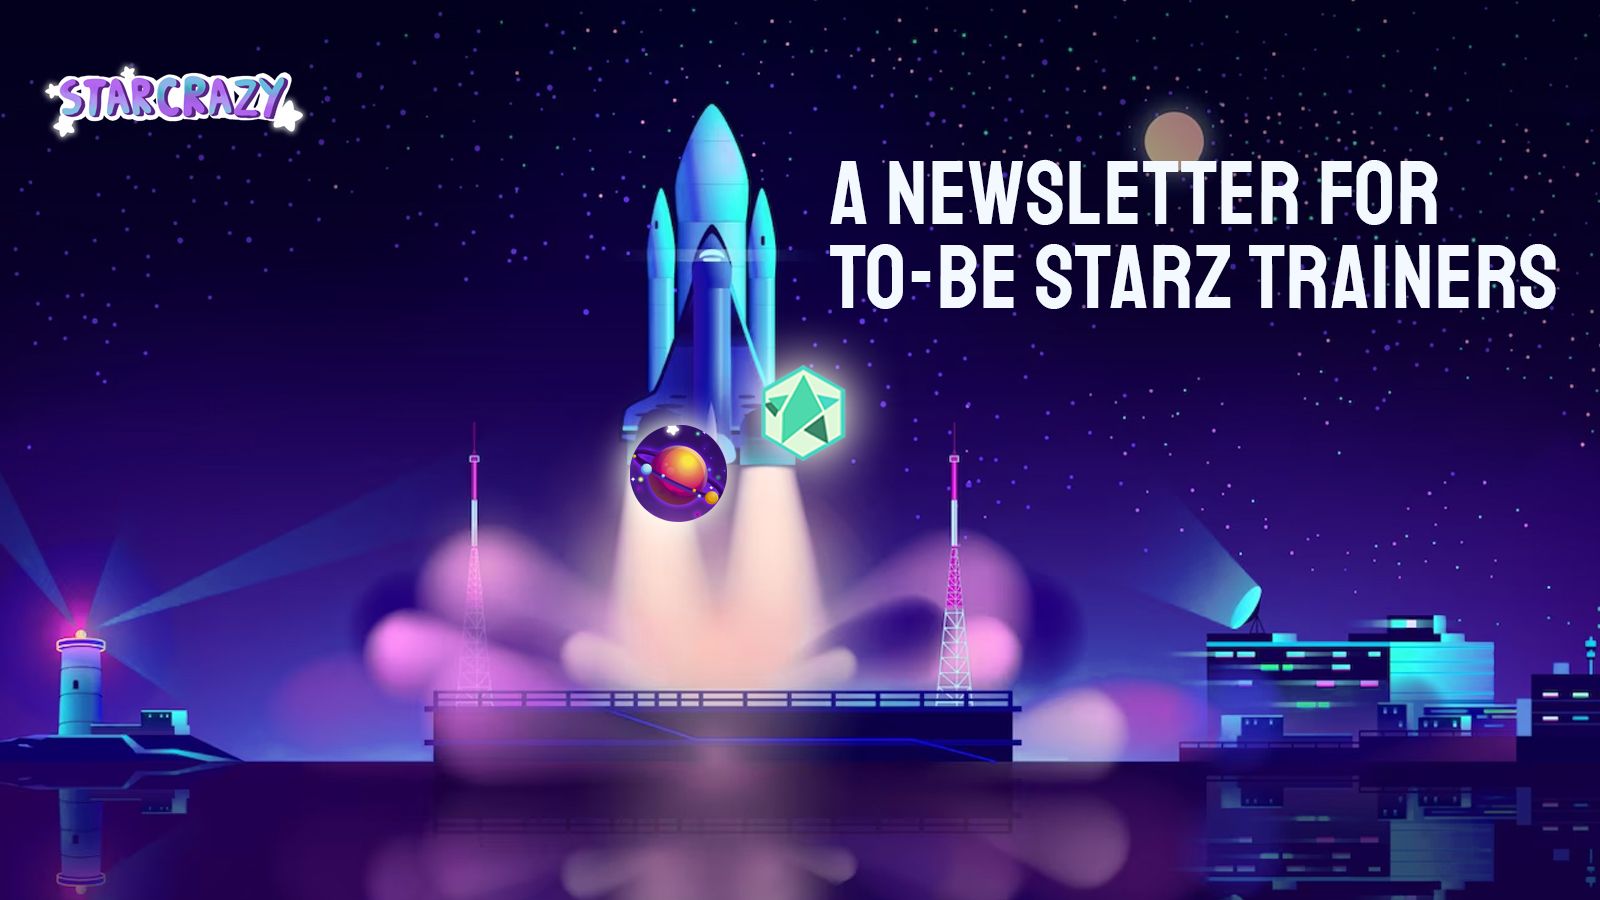 A Newsletter for To-Be Starz Trainers